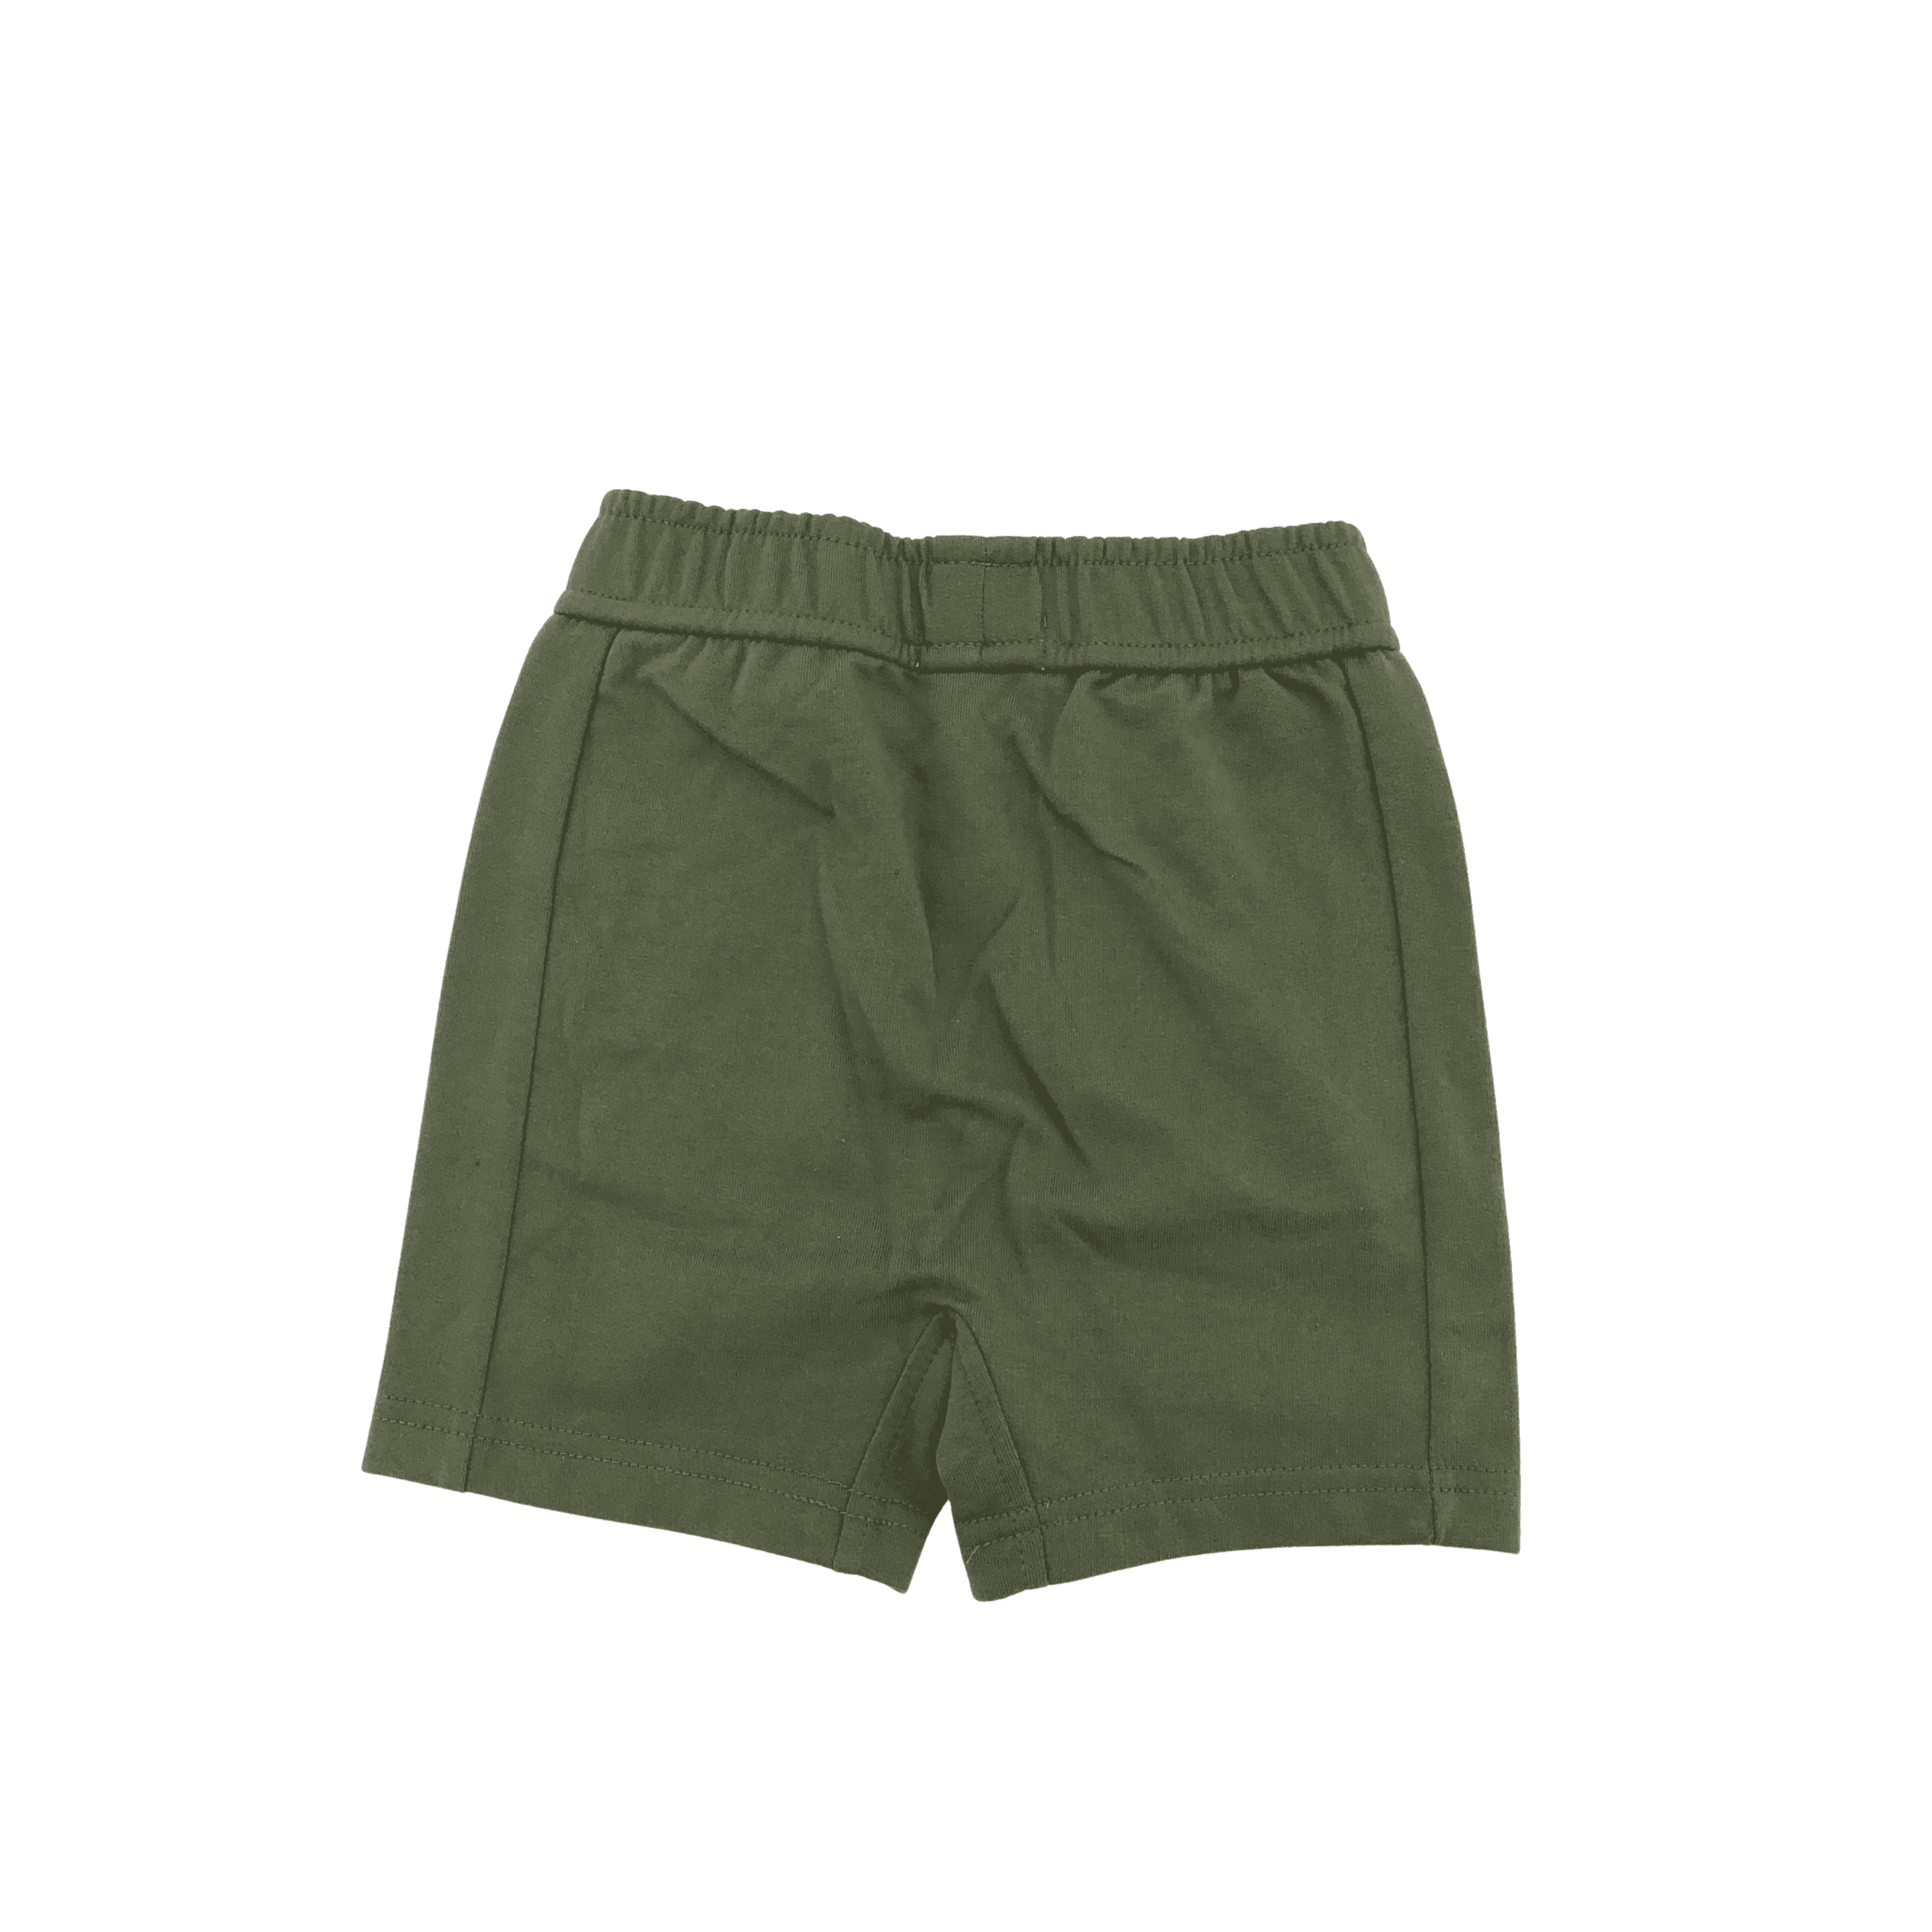 Epic Threads Boy's Shorts: Olive Green/ Various Sizes